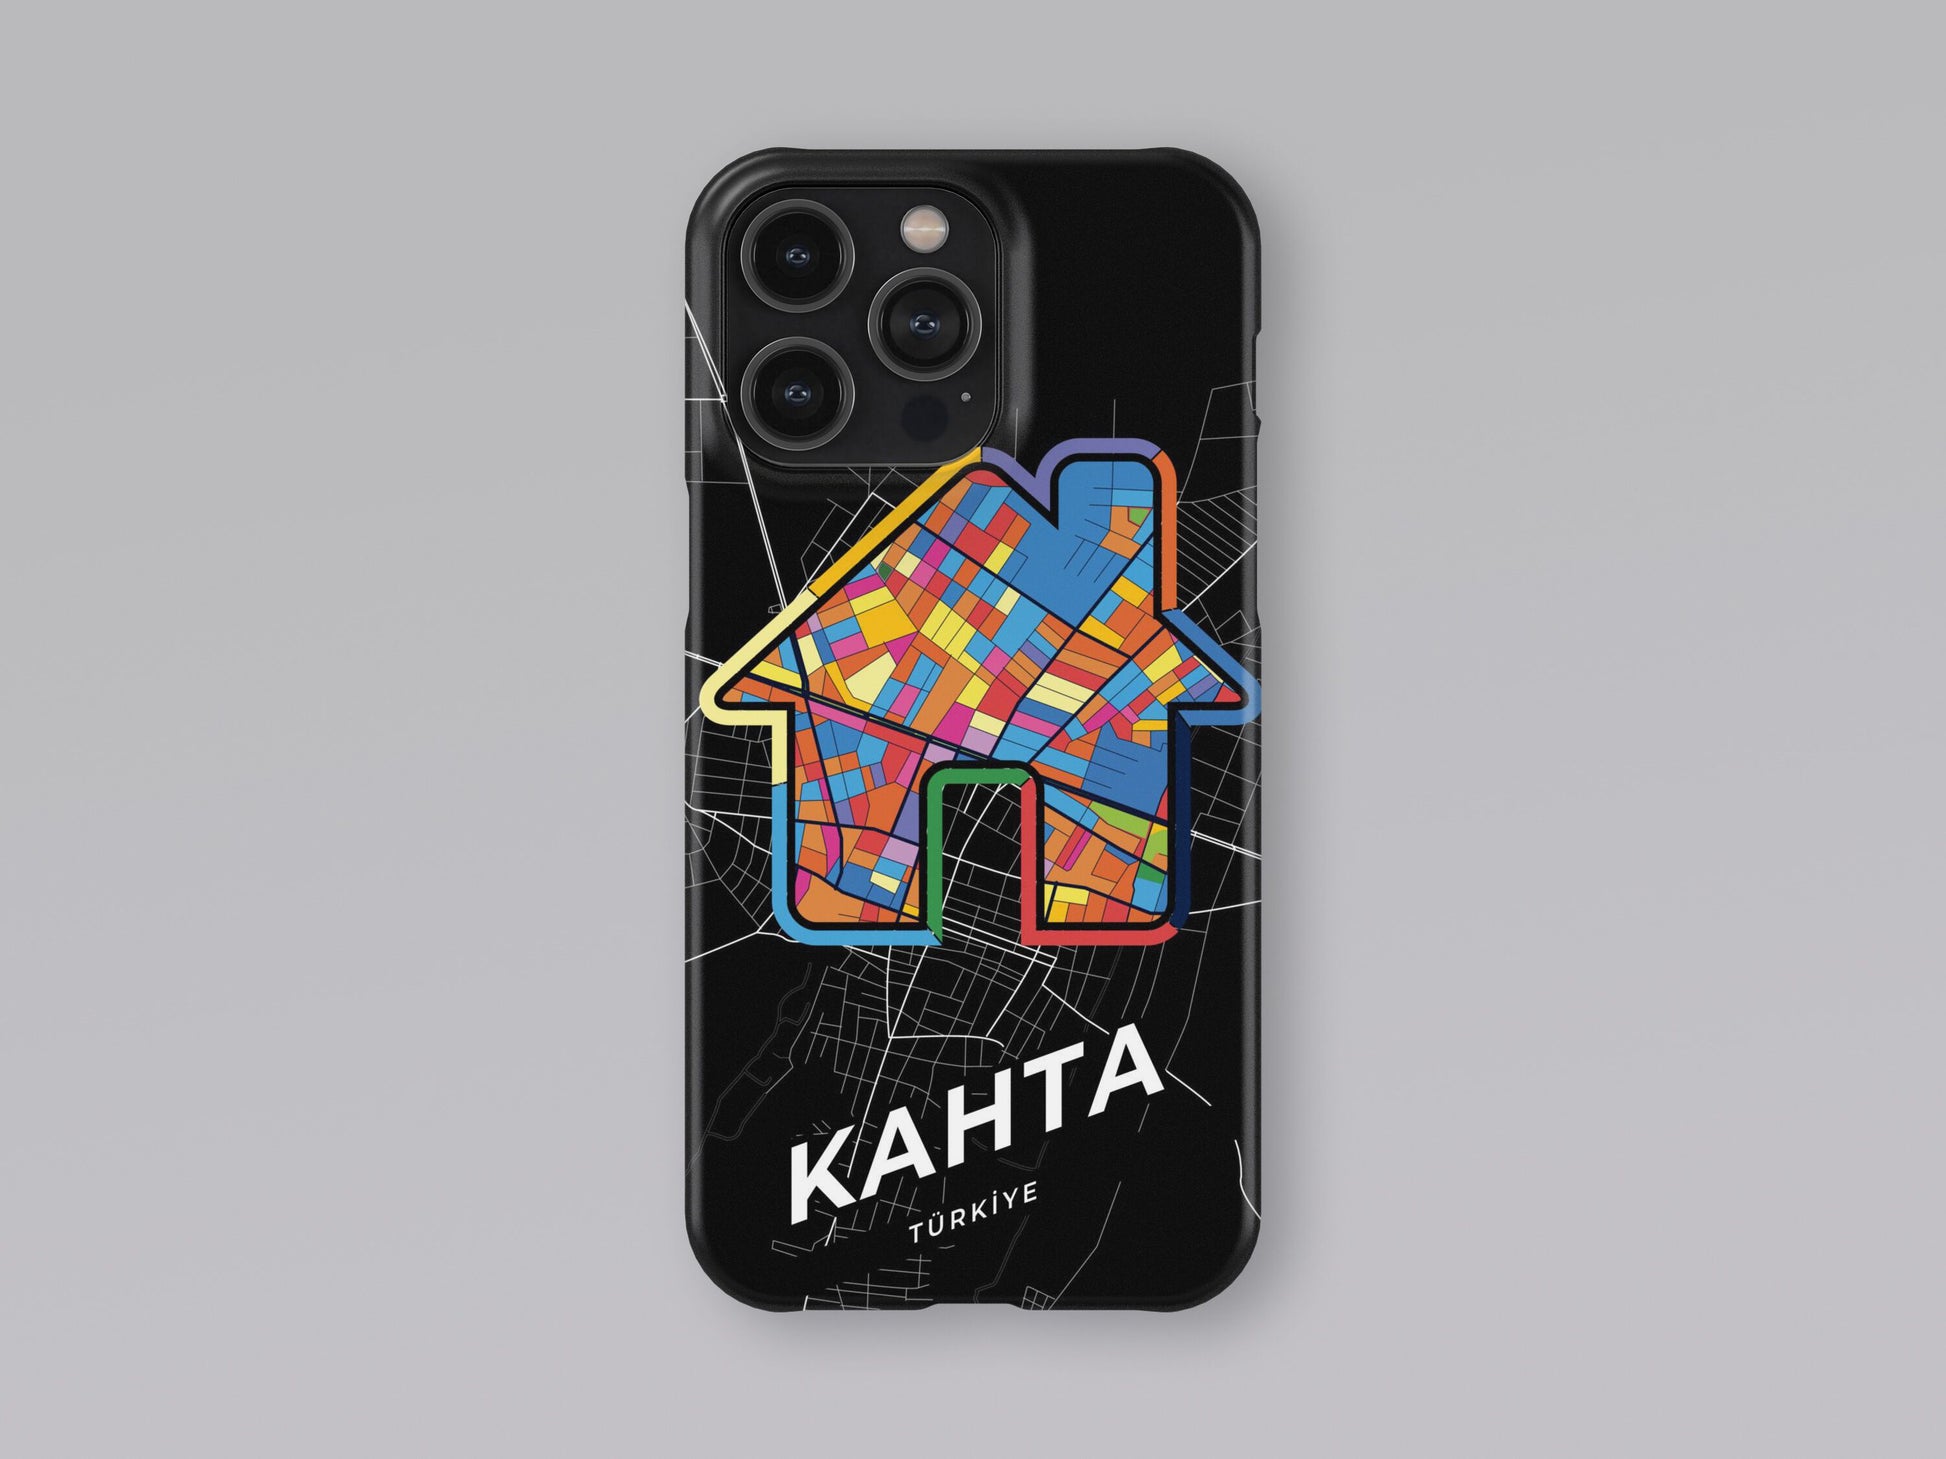 Kahta Turkey slim phone case with colorful icon. Birthday, wedding or housewarming gift. Couple match cases. 3